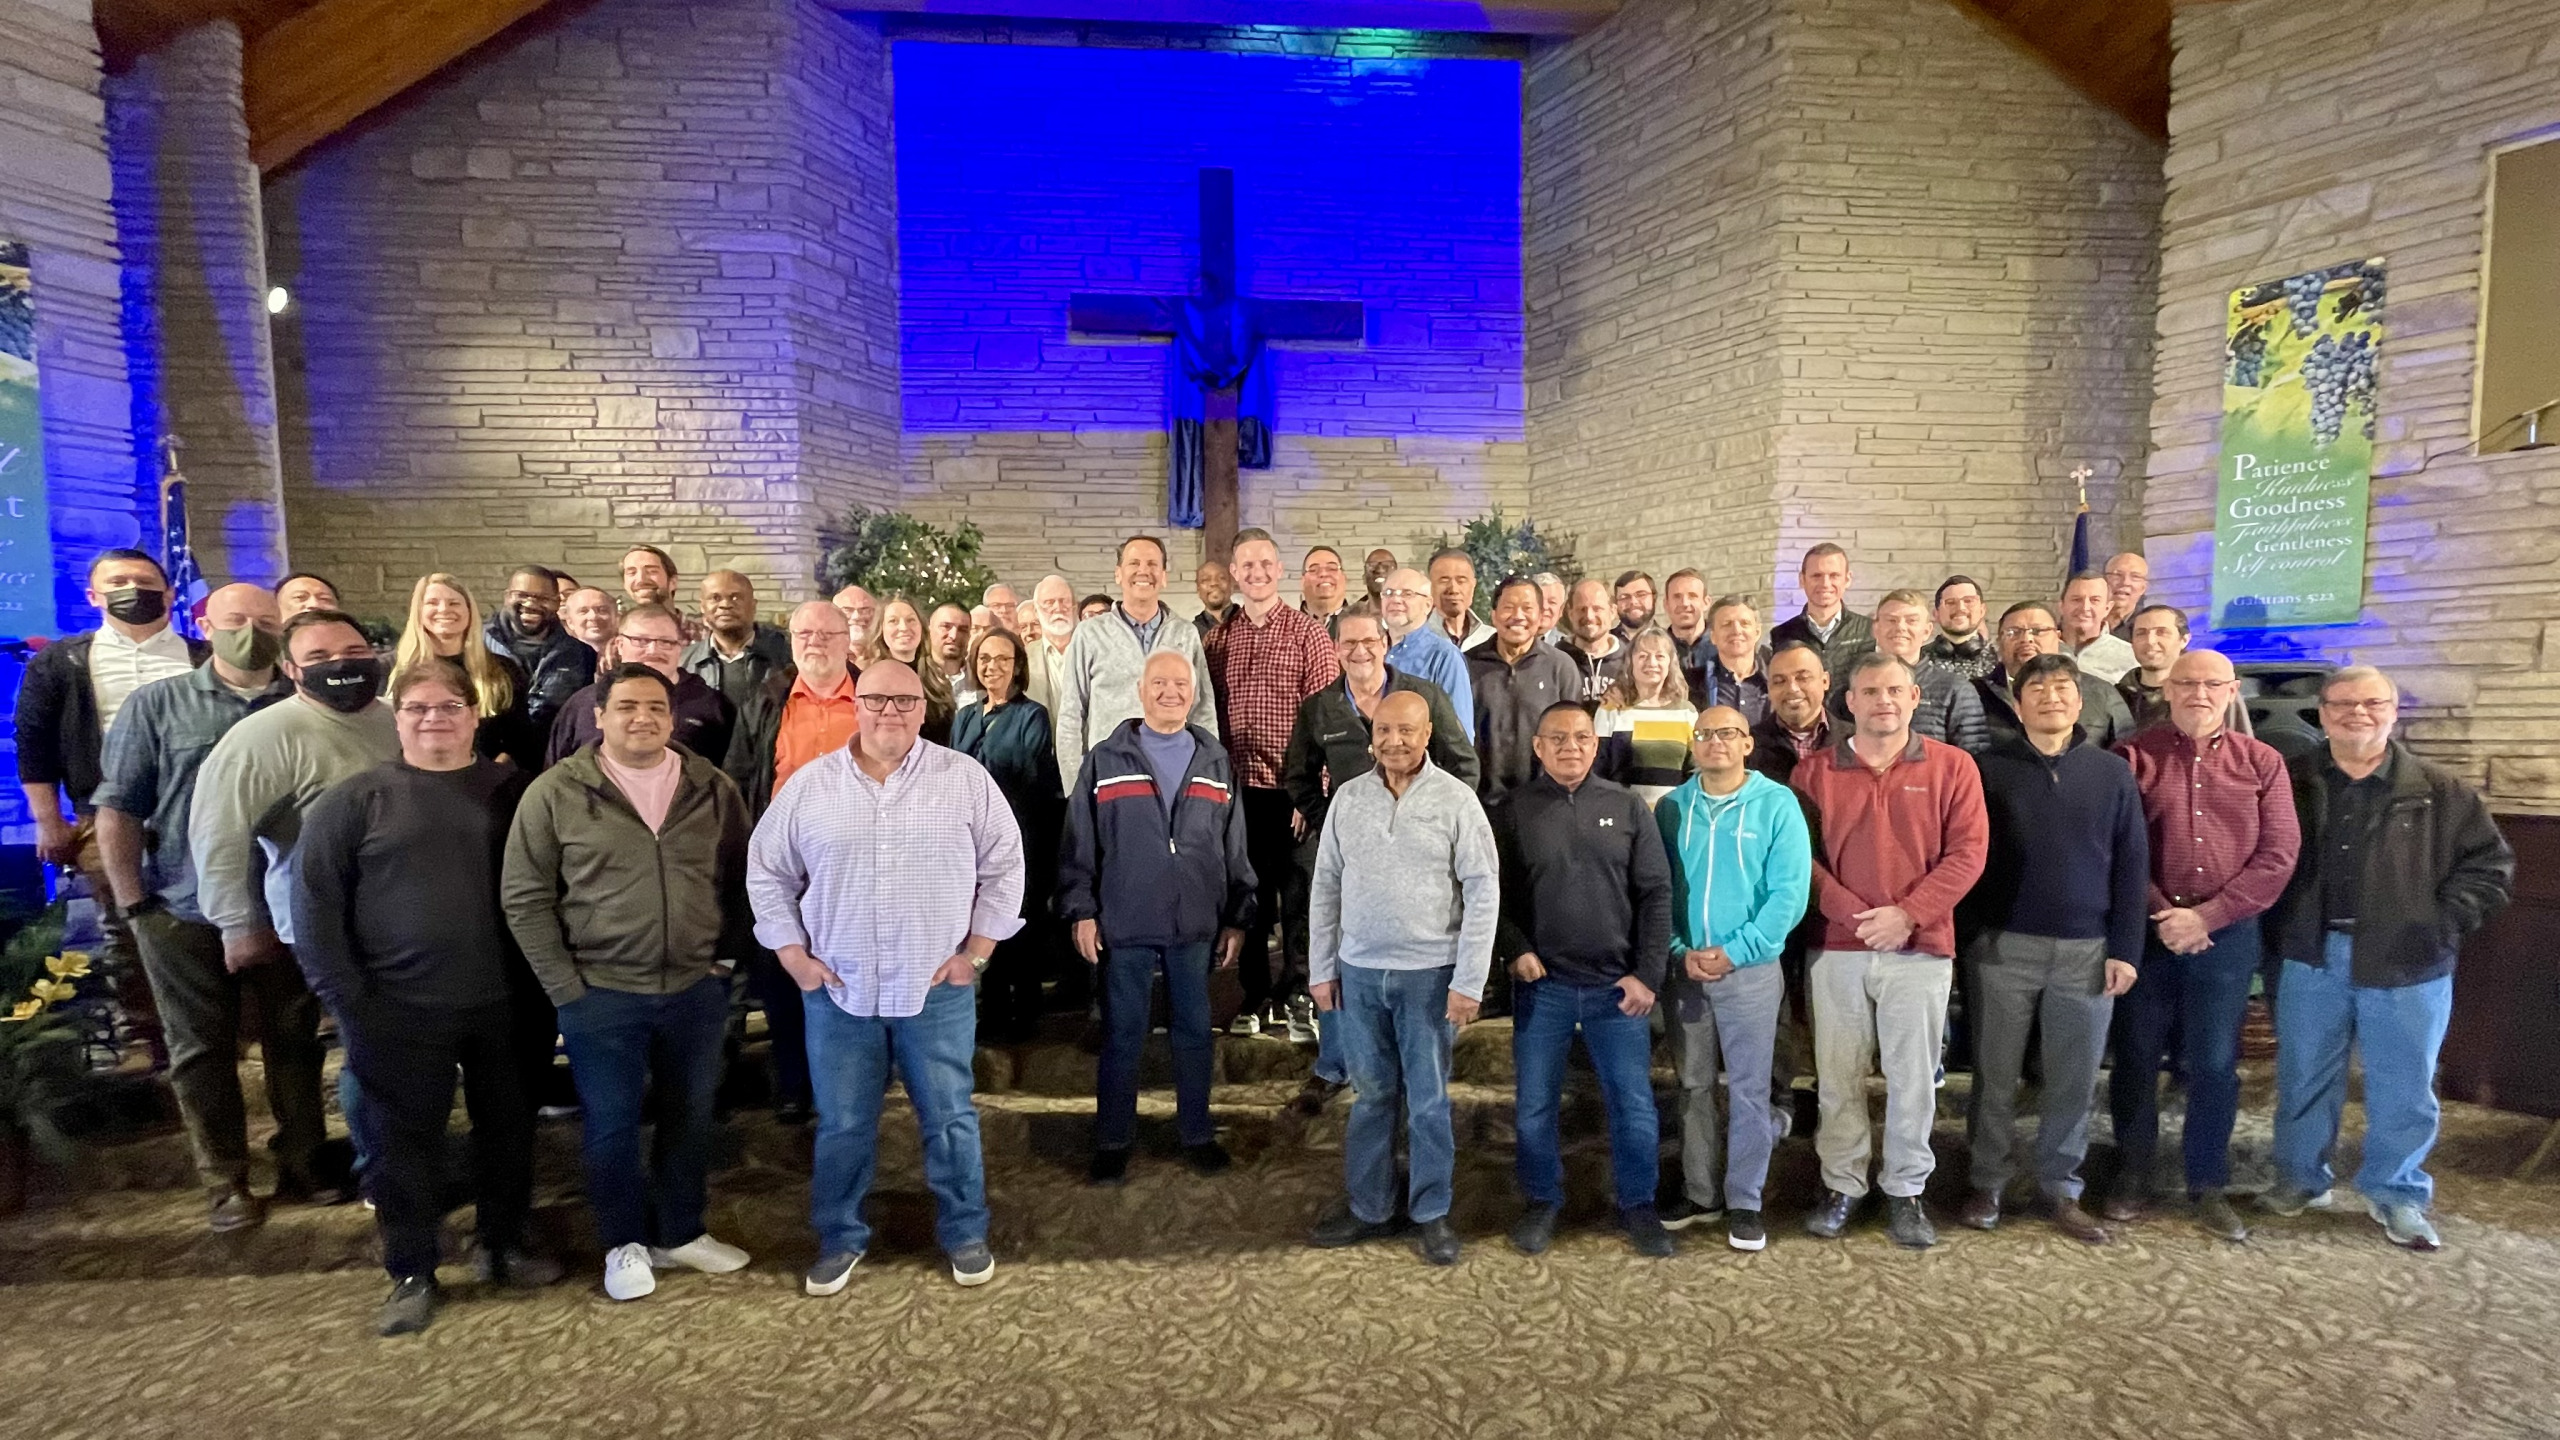 PASTORS GATHER FOR FELLOWSHIP AND REVITALIZATION